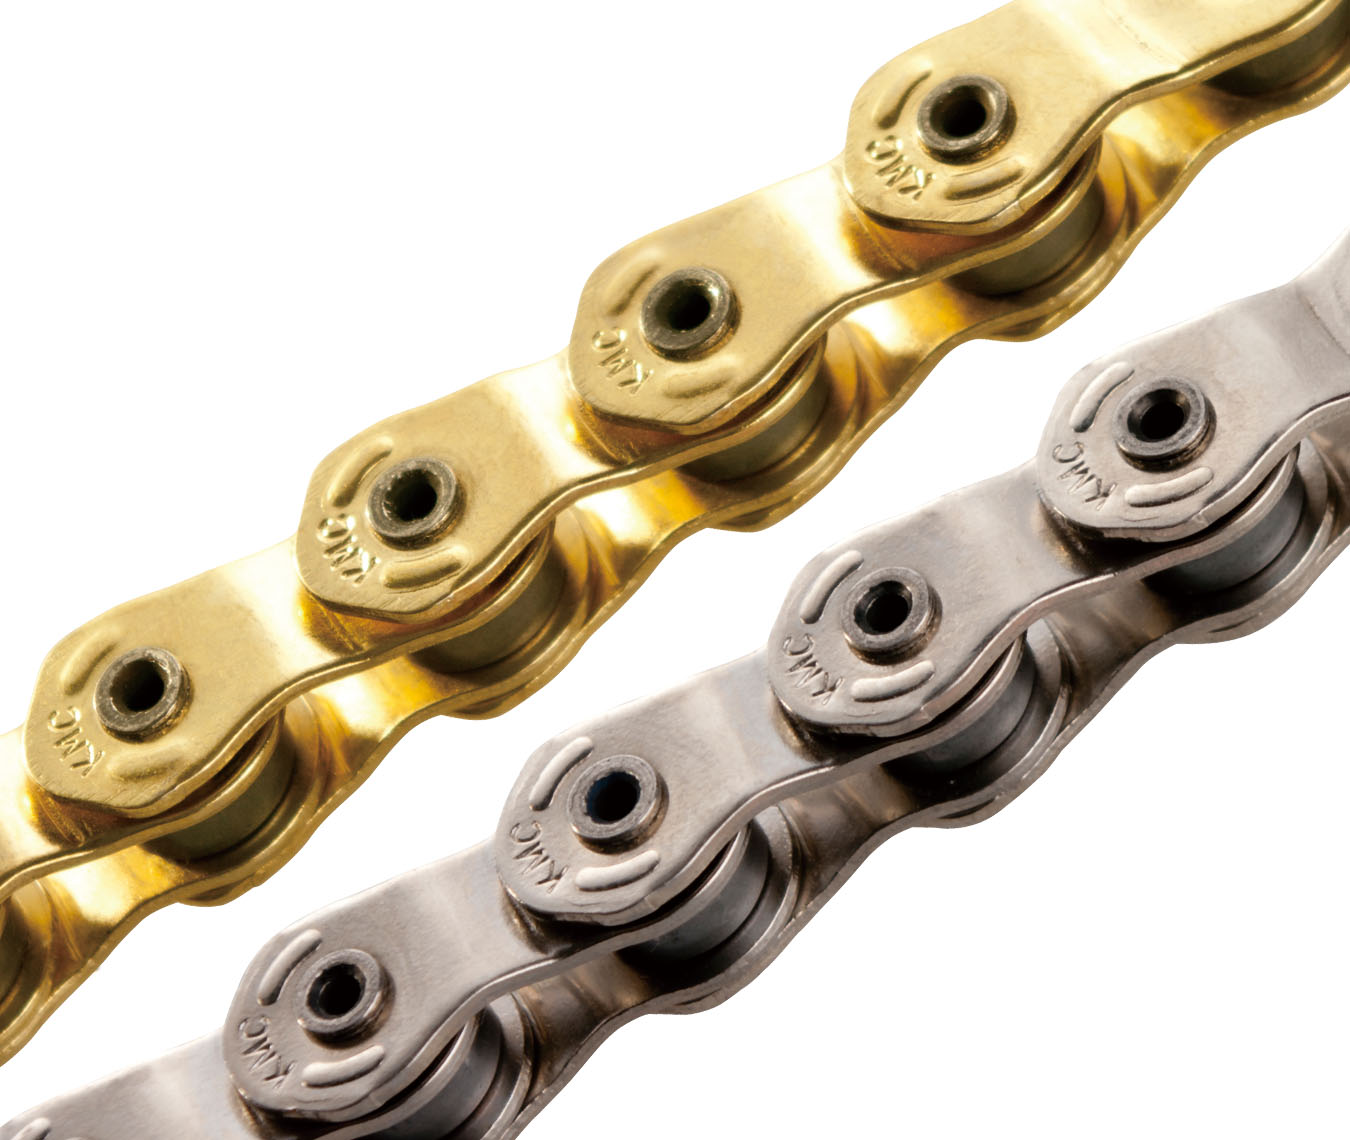 A half link chain allows you to add or remove half a link instead of a full link of a standard chain.